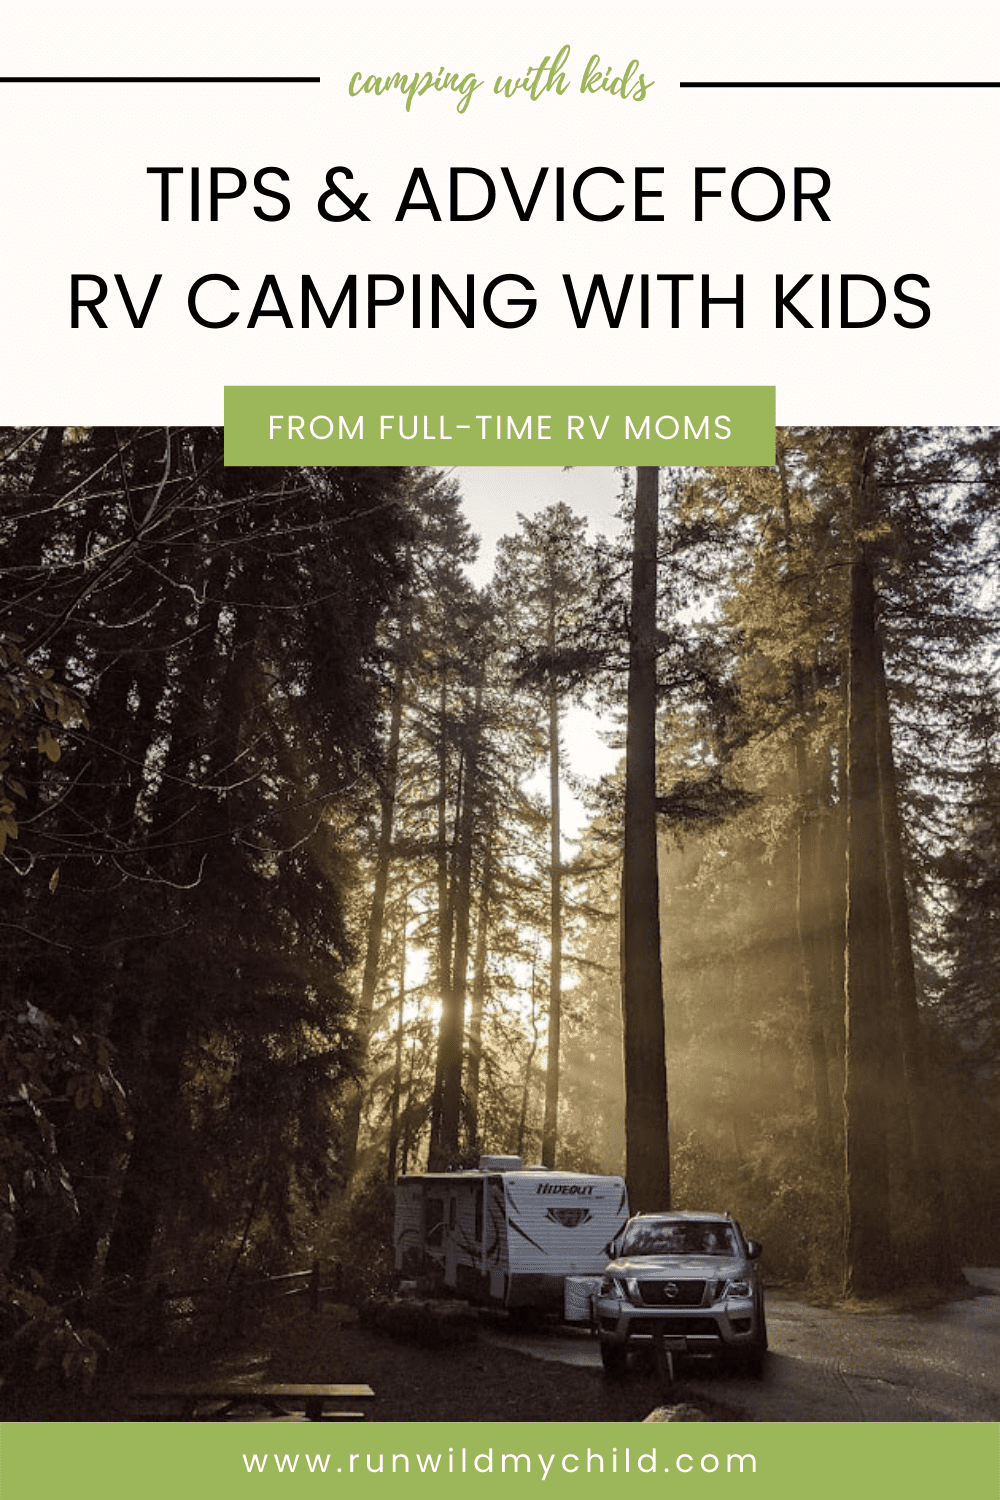 Tips & Advice for RV camping with kids from full-time RV moms